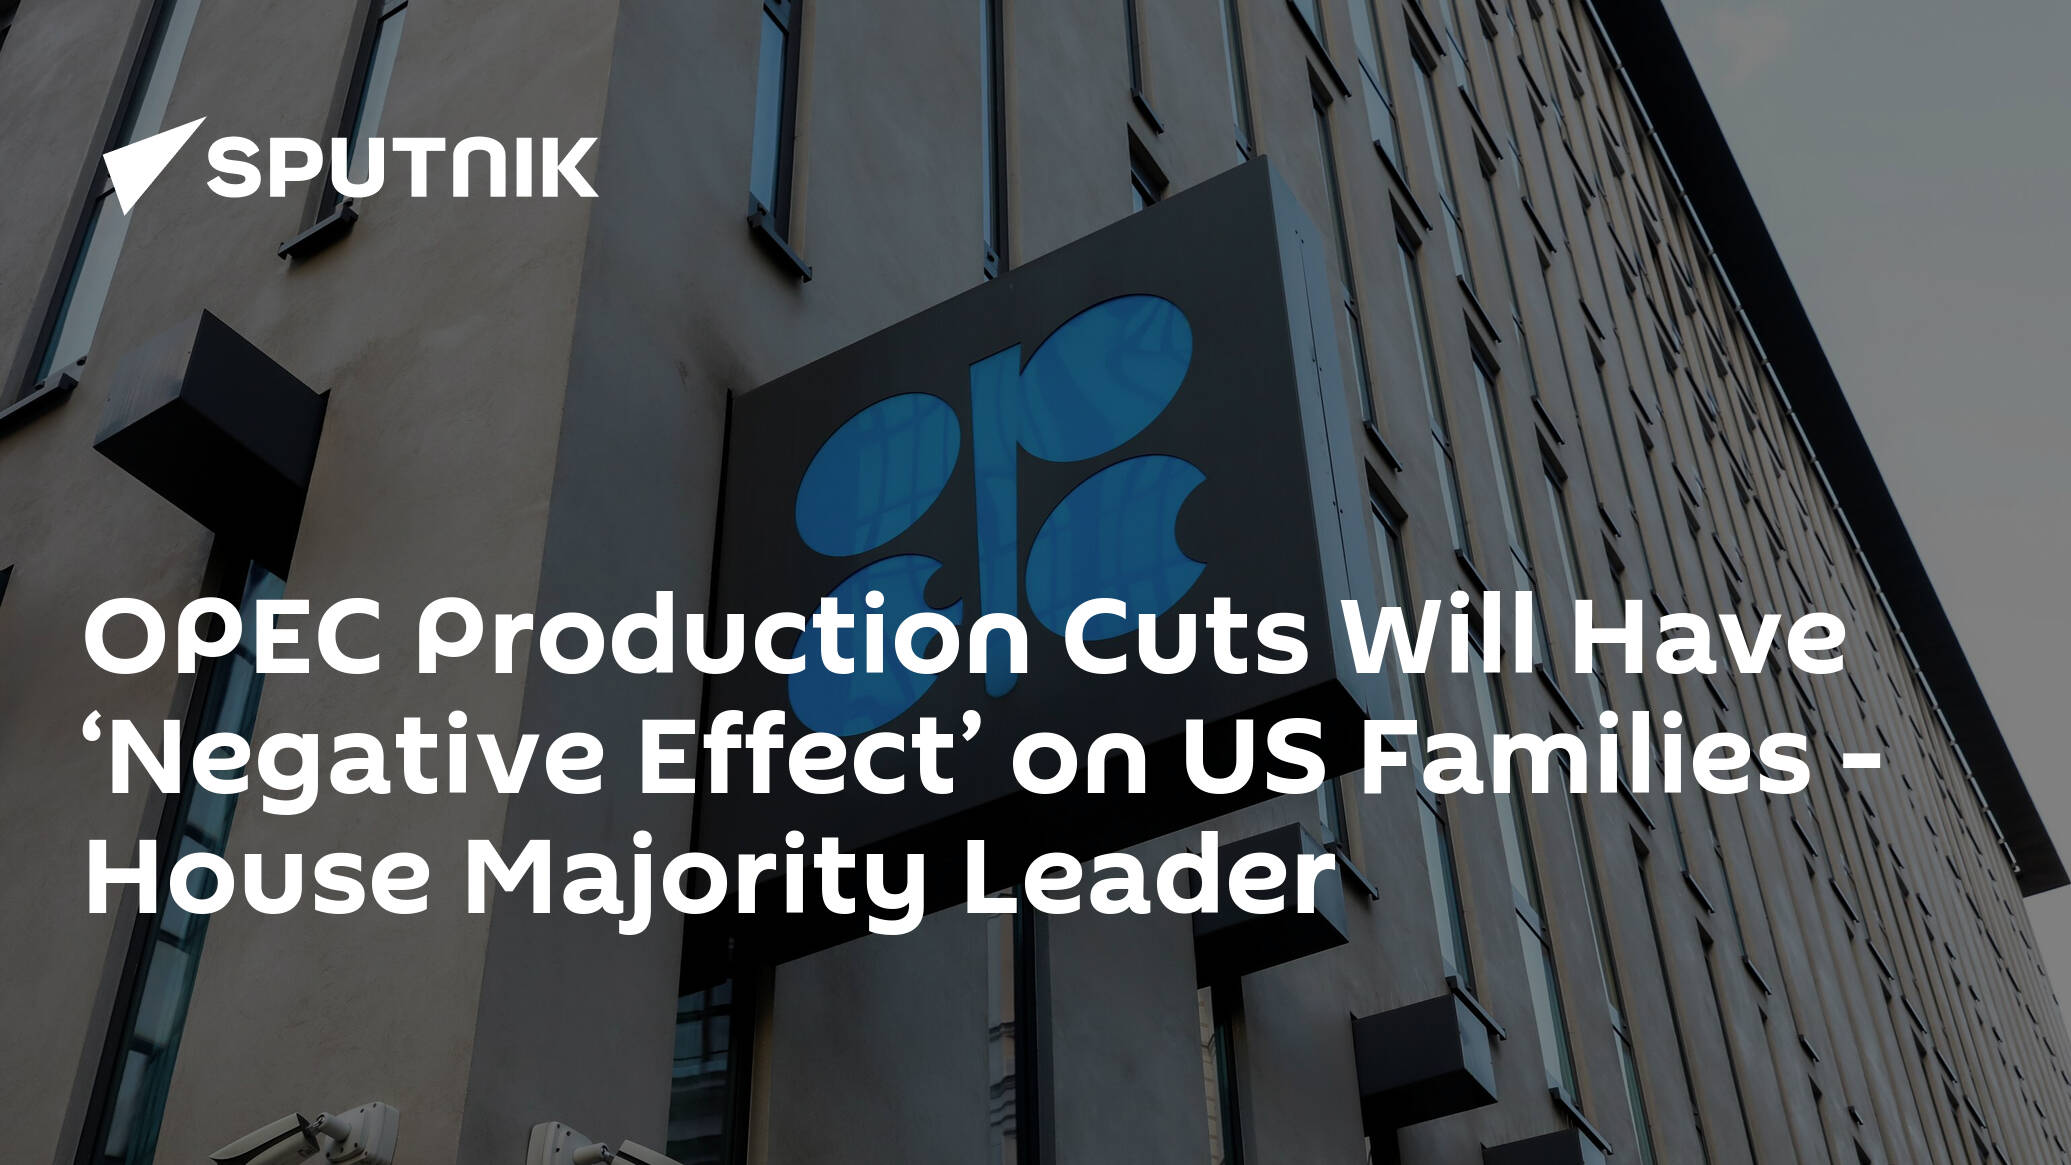 OPEC Production Cuts Will Have ‘Negative Effect’ on US Families – House Majority Leader